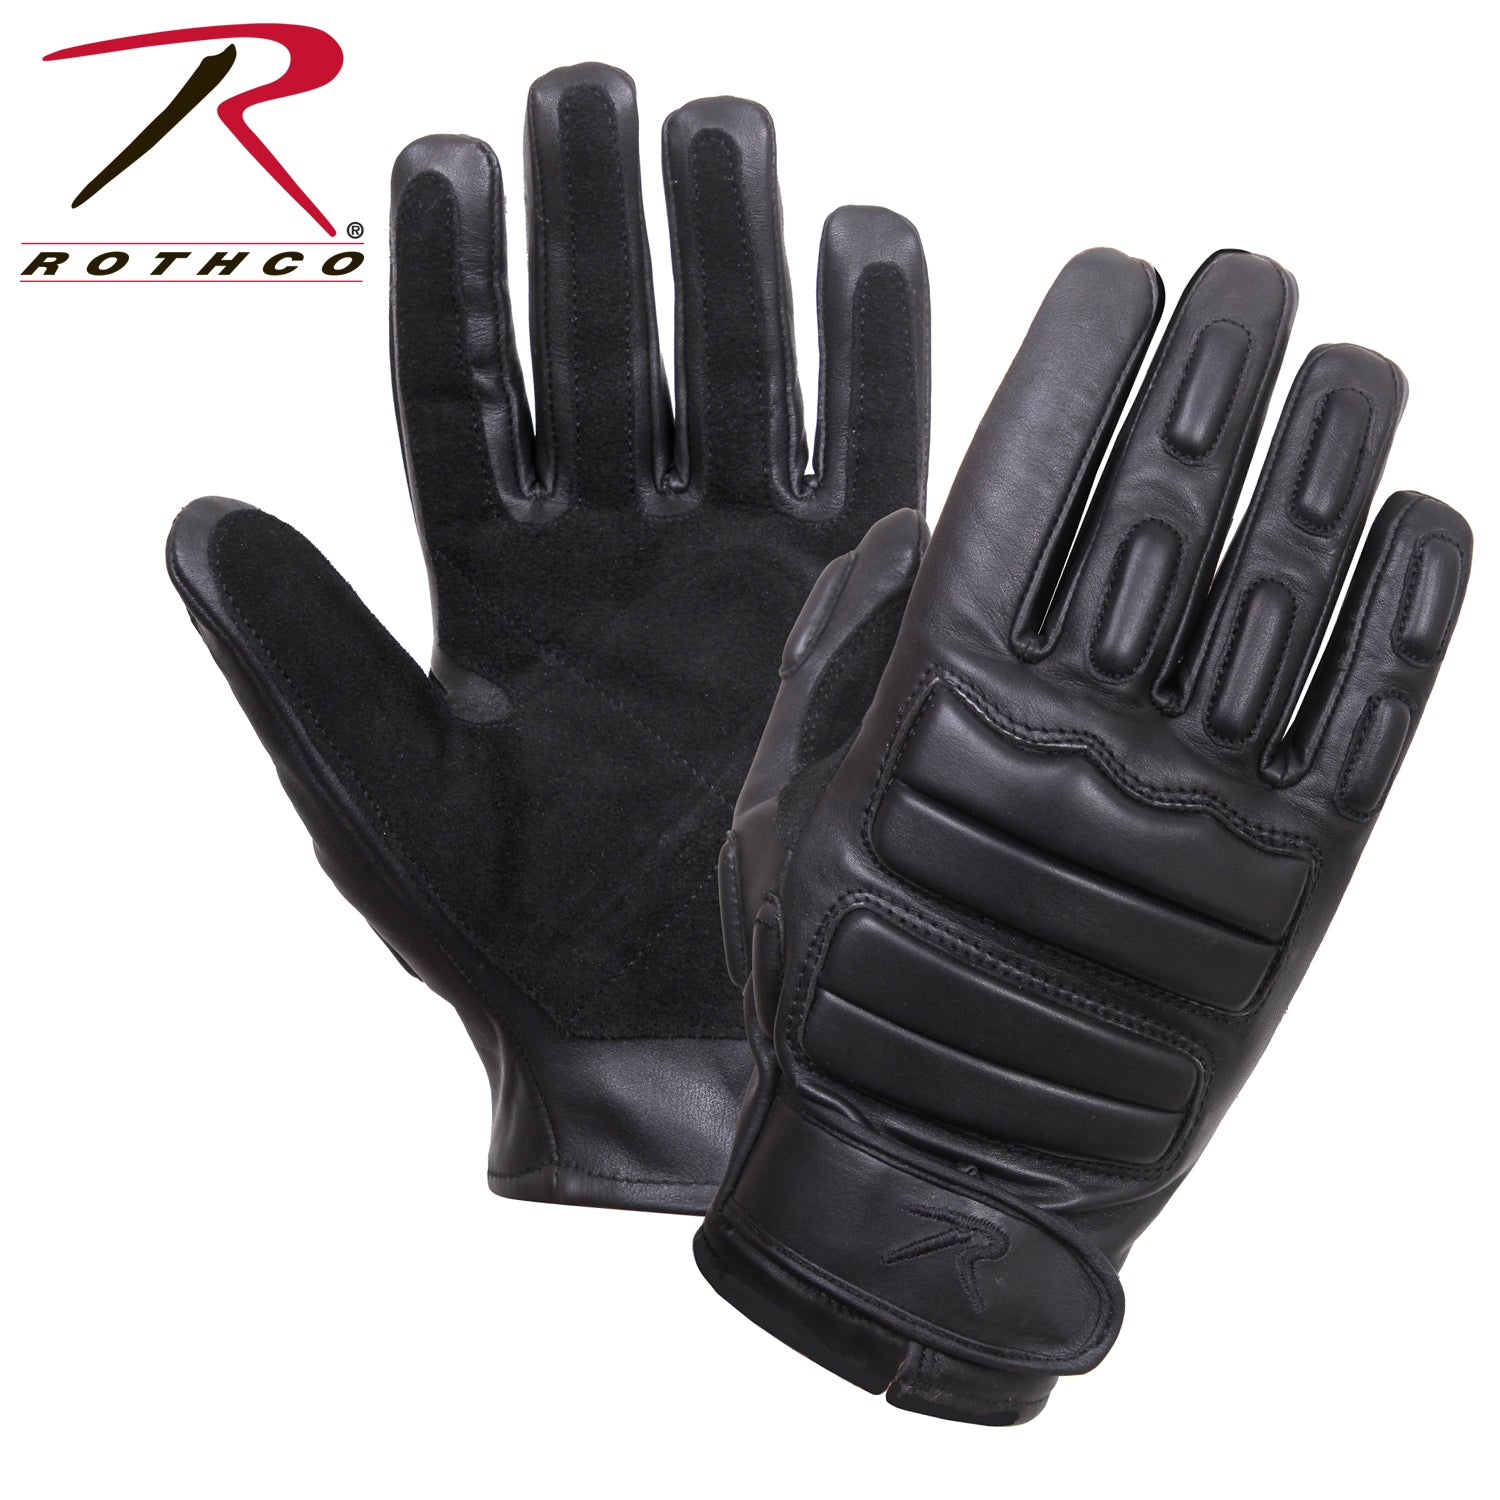 Rothco Padded Tactical Gloves - Tactical Choice Plus